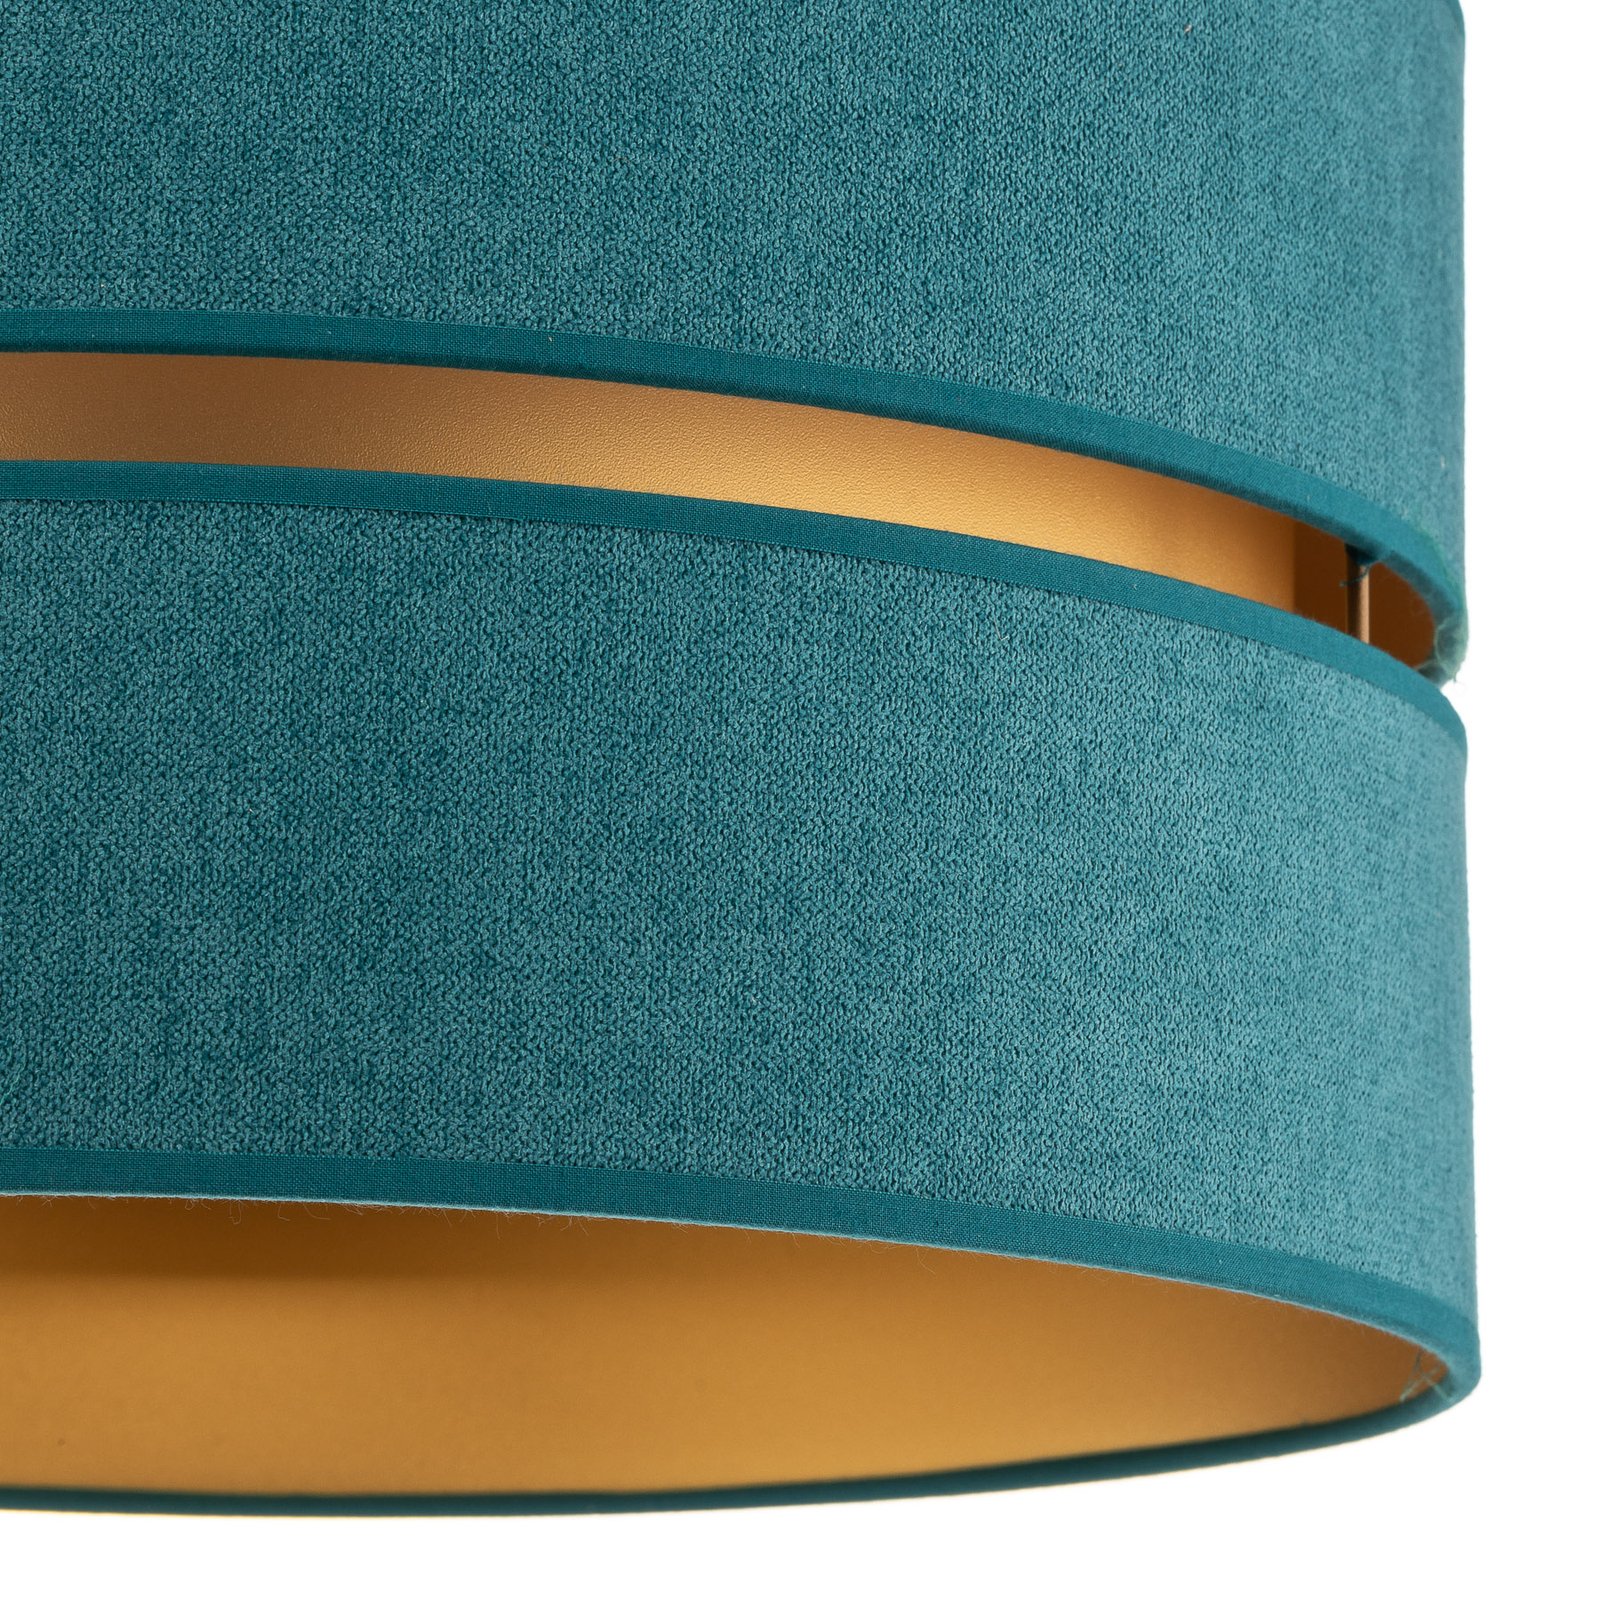 Duo ceiling light, fabric, turquoise/gold Ø40cm